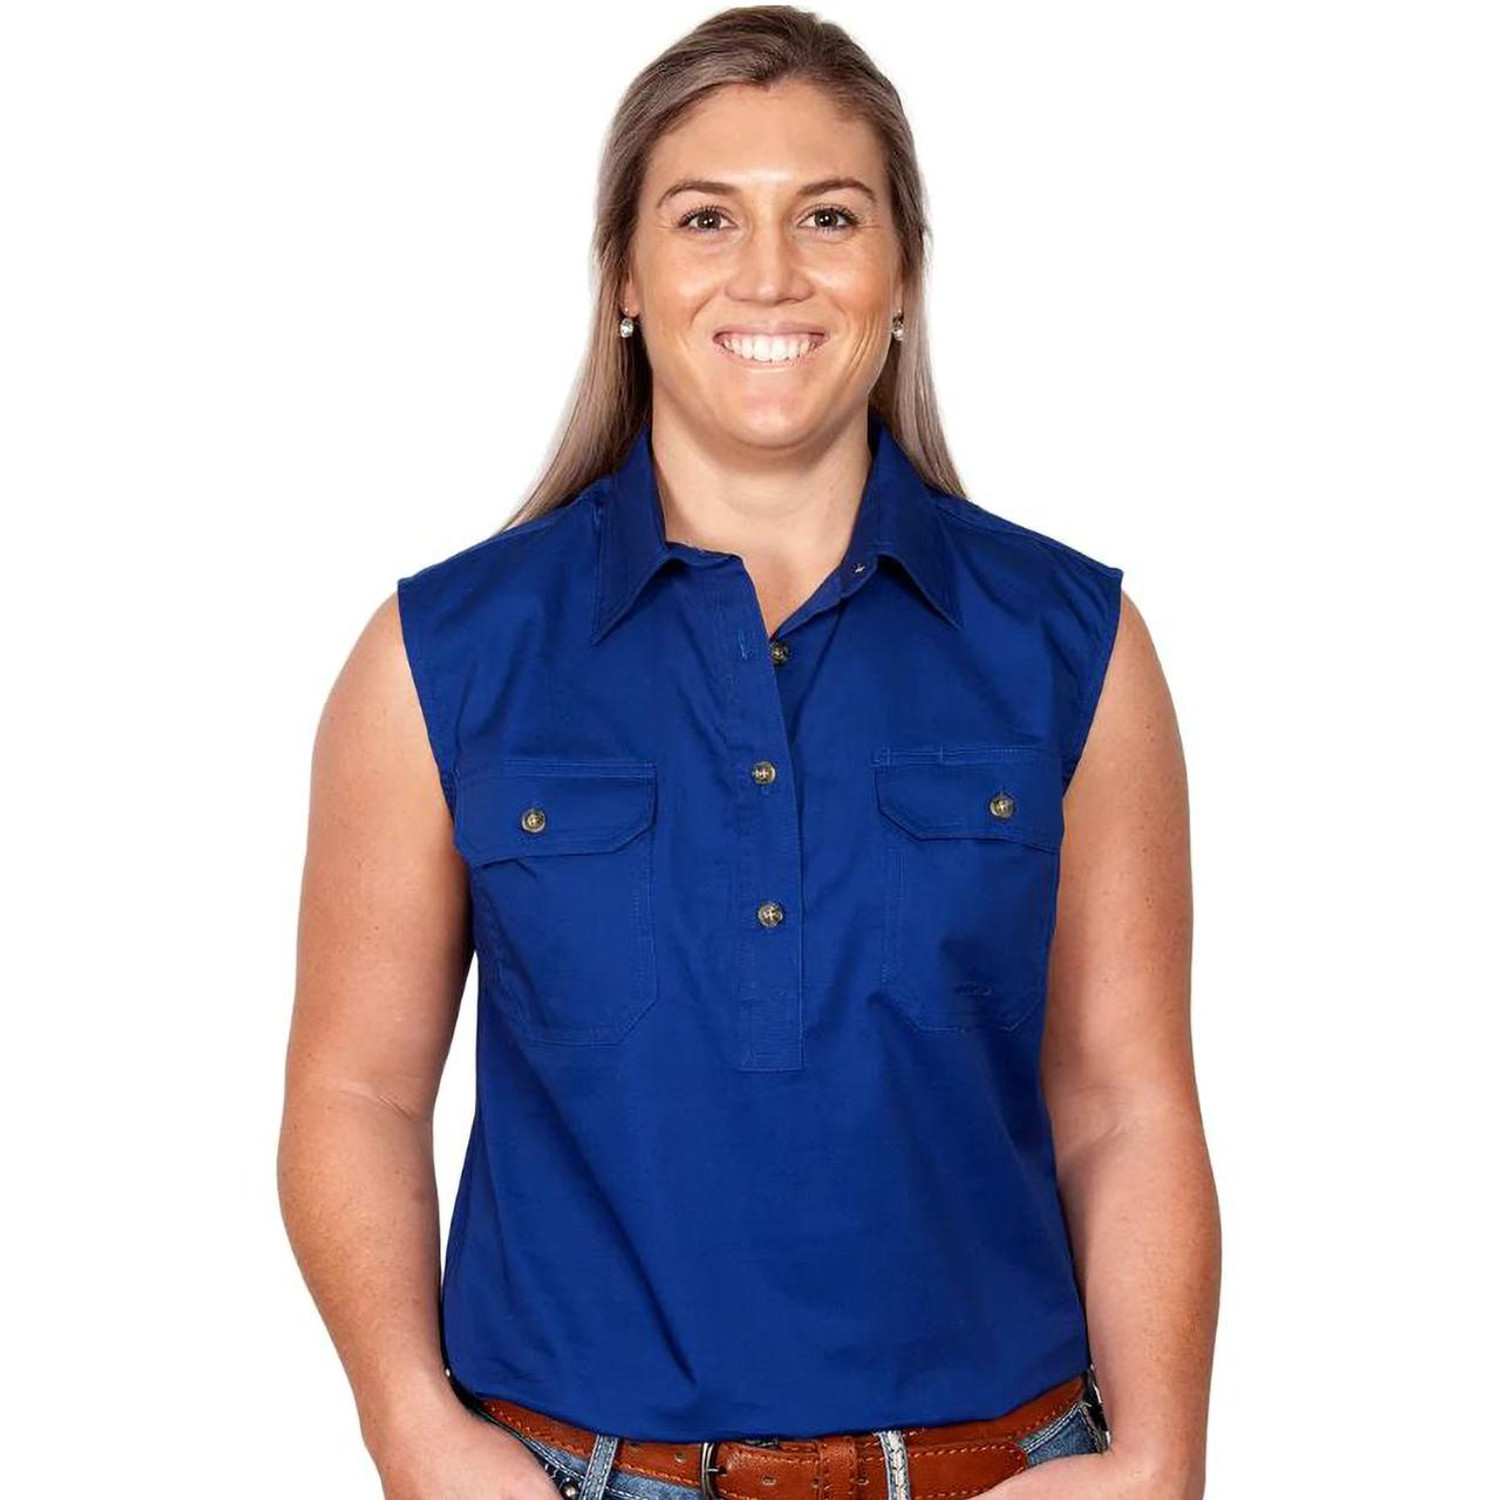  Just Country 50503 Ladies Kerry Closed Front Sleeveless Shirt  in Cobalt (Bulk Buy Deal, Buy 4 or more Just Country Adults Shirts for $44.95 Each!) 